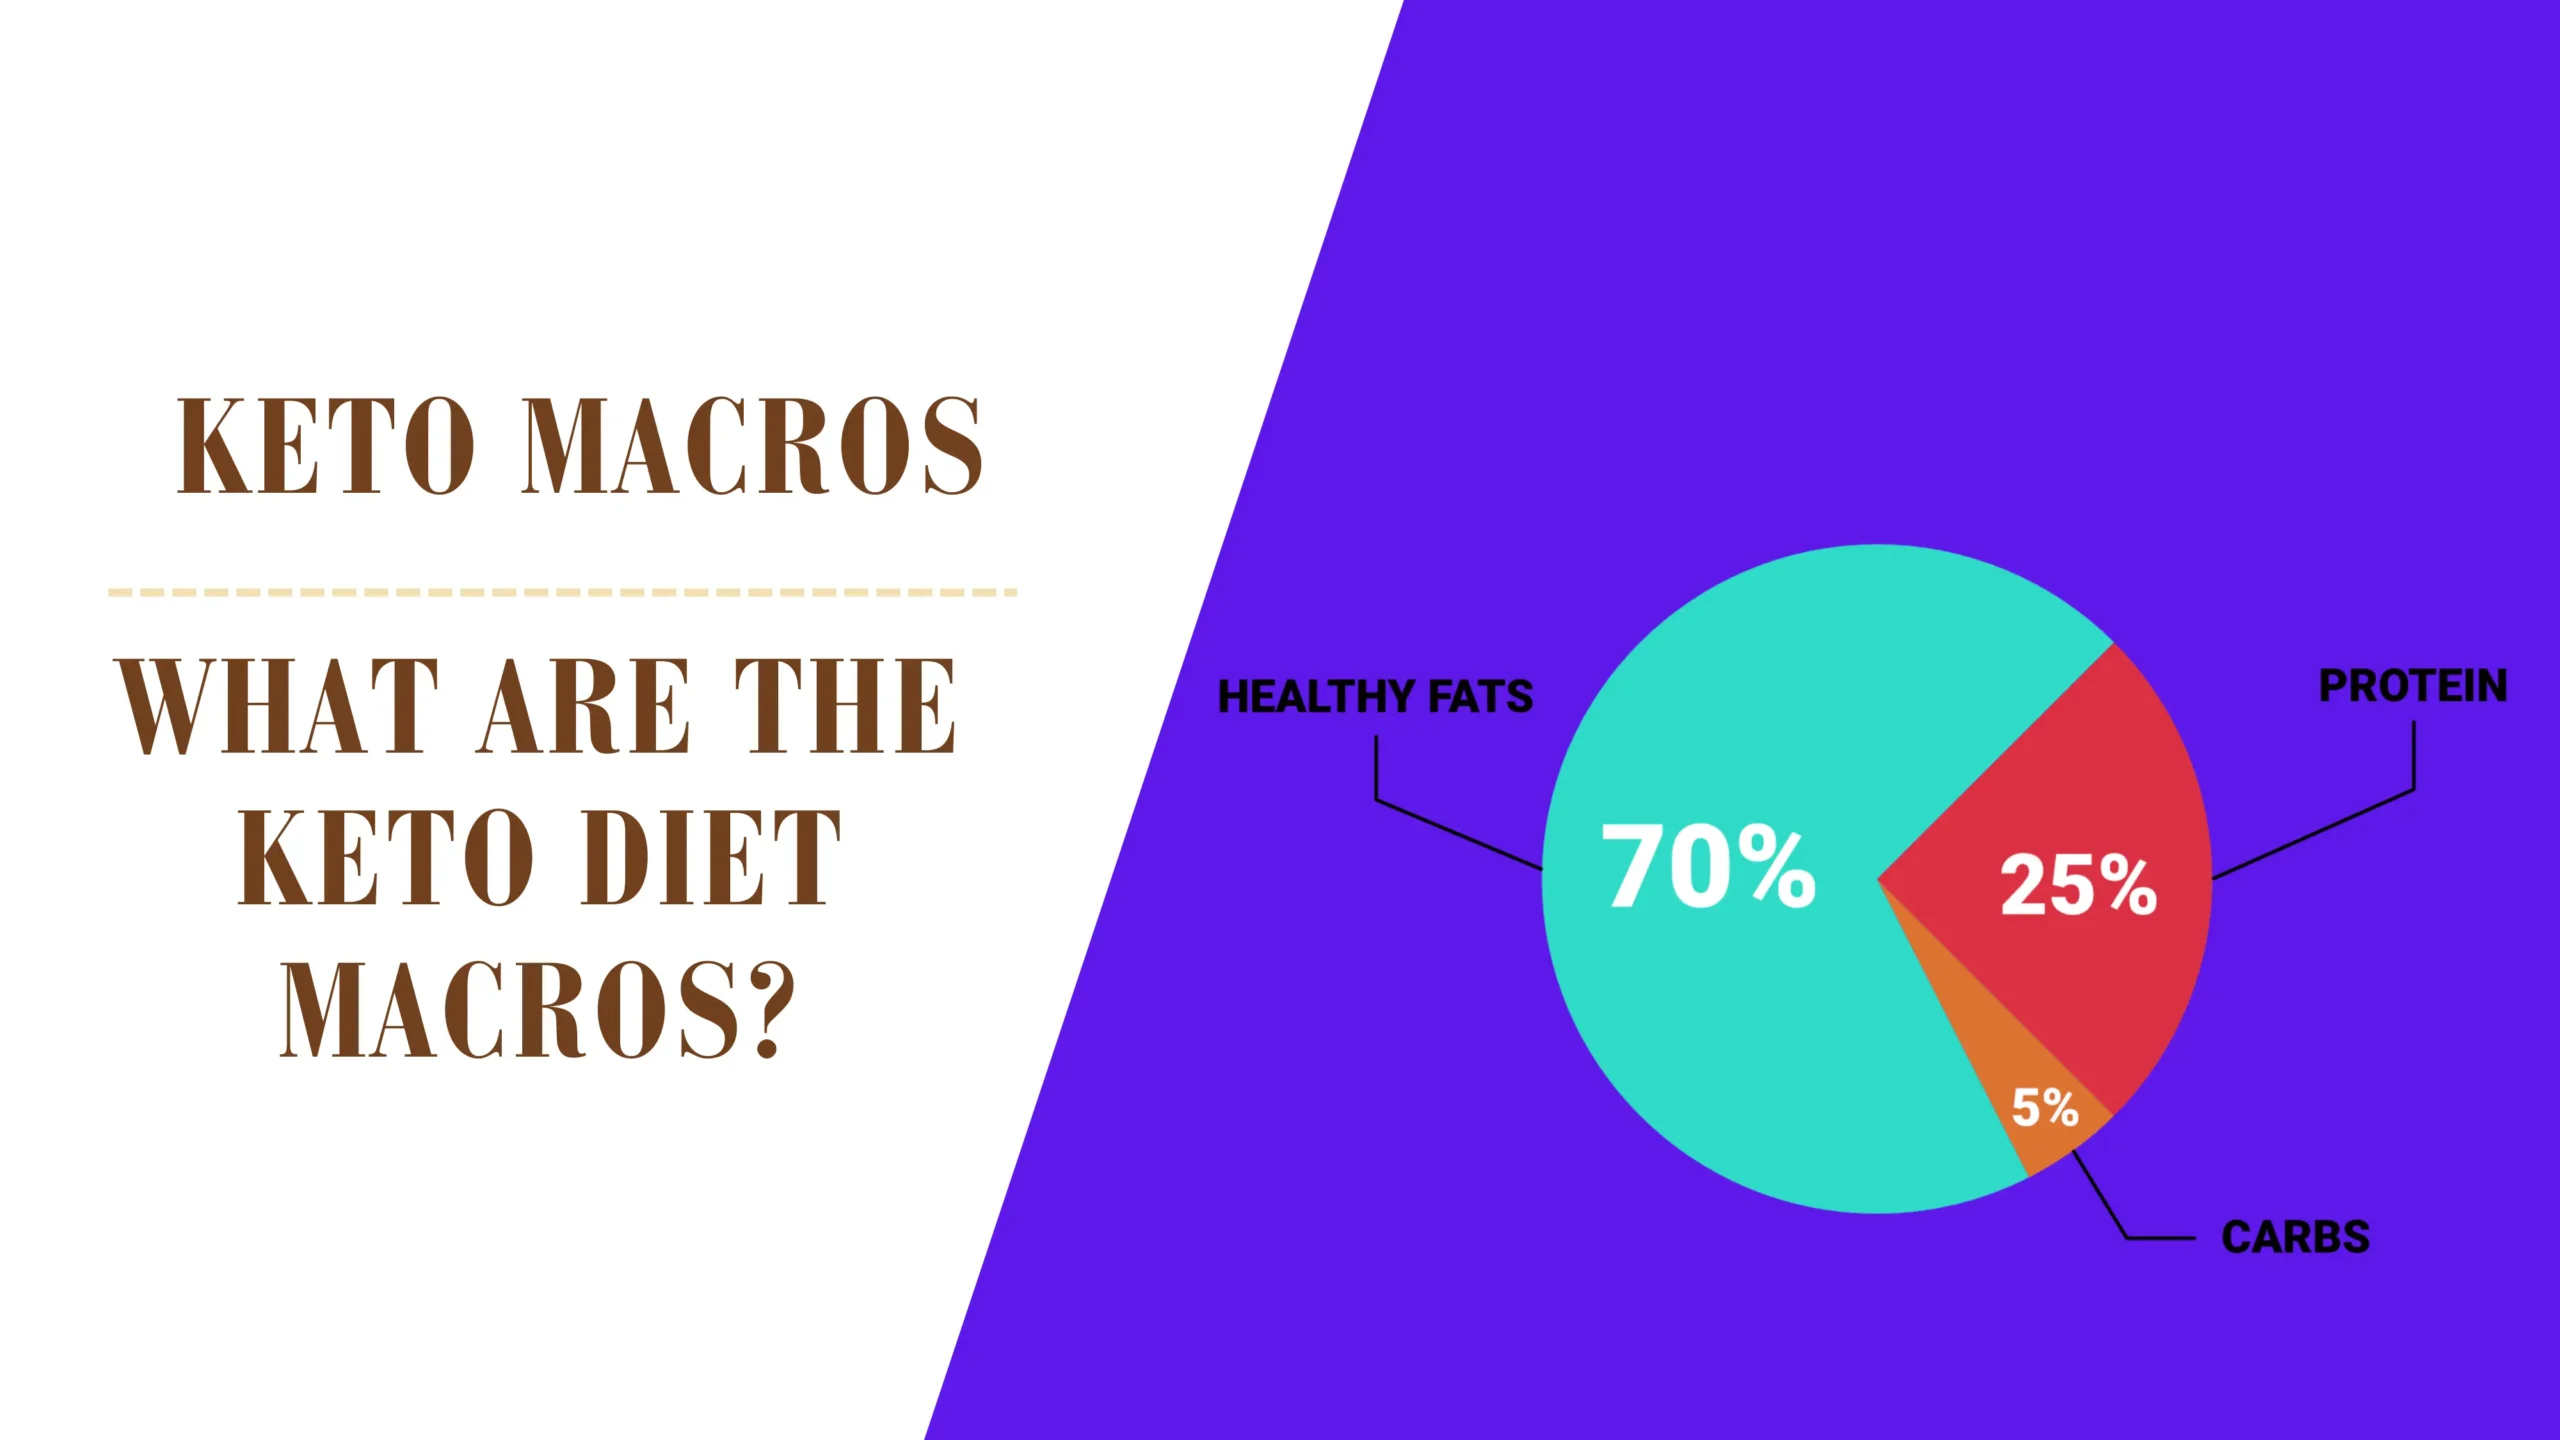 What are the keto diet macros